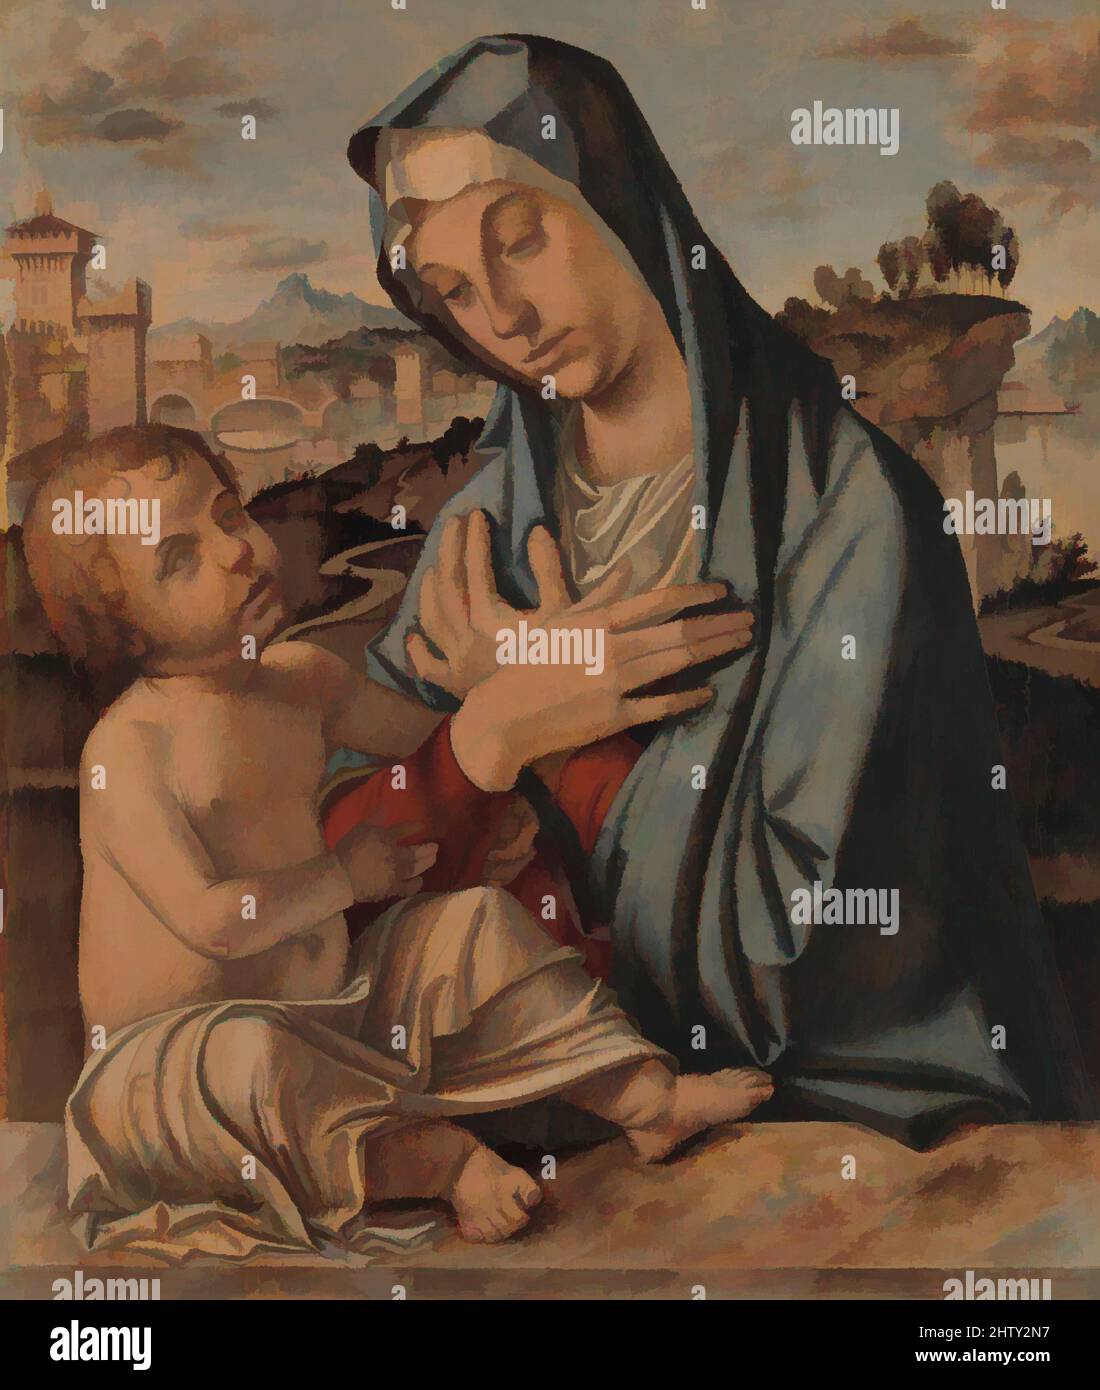 Art inspired by Madonna Adoring the Child, Oil(?) on wood, 24 3/4 x 20 1/2 in. (62.9 x 52.1 cm), Paintings, Bartolomeo Montagna (Bartolomeo Cincani) (Italian, Vicentine, before 1459–1523, Classic works modernized by Artotop with a splash of modernity. Shapes, color and value, eye-catching visual impact on art. Emotions through freedom of artworks in a contemporary way. A timeless message pursuing a wildly creative new direction. Artists turning to the digital medium and creating the Artotop NFT Stock Photo